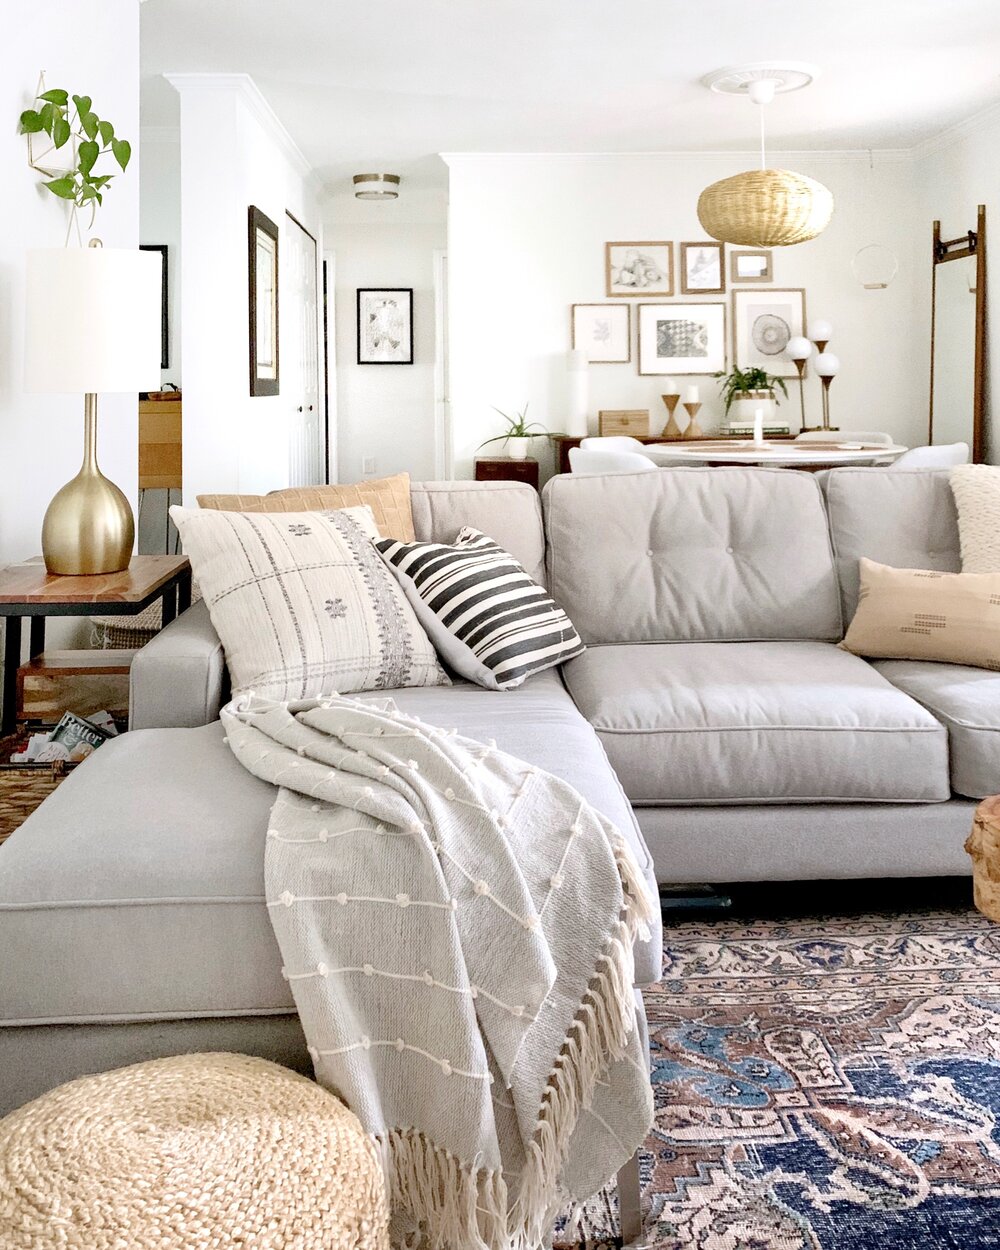 KC Design Co.5 Easy Ways to Style a Throw Blanket on a Sofa